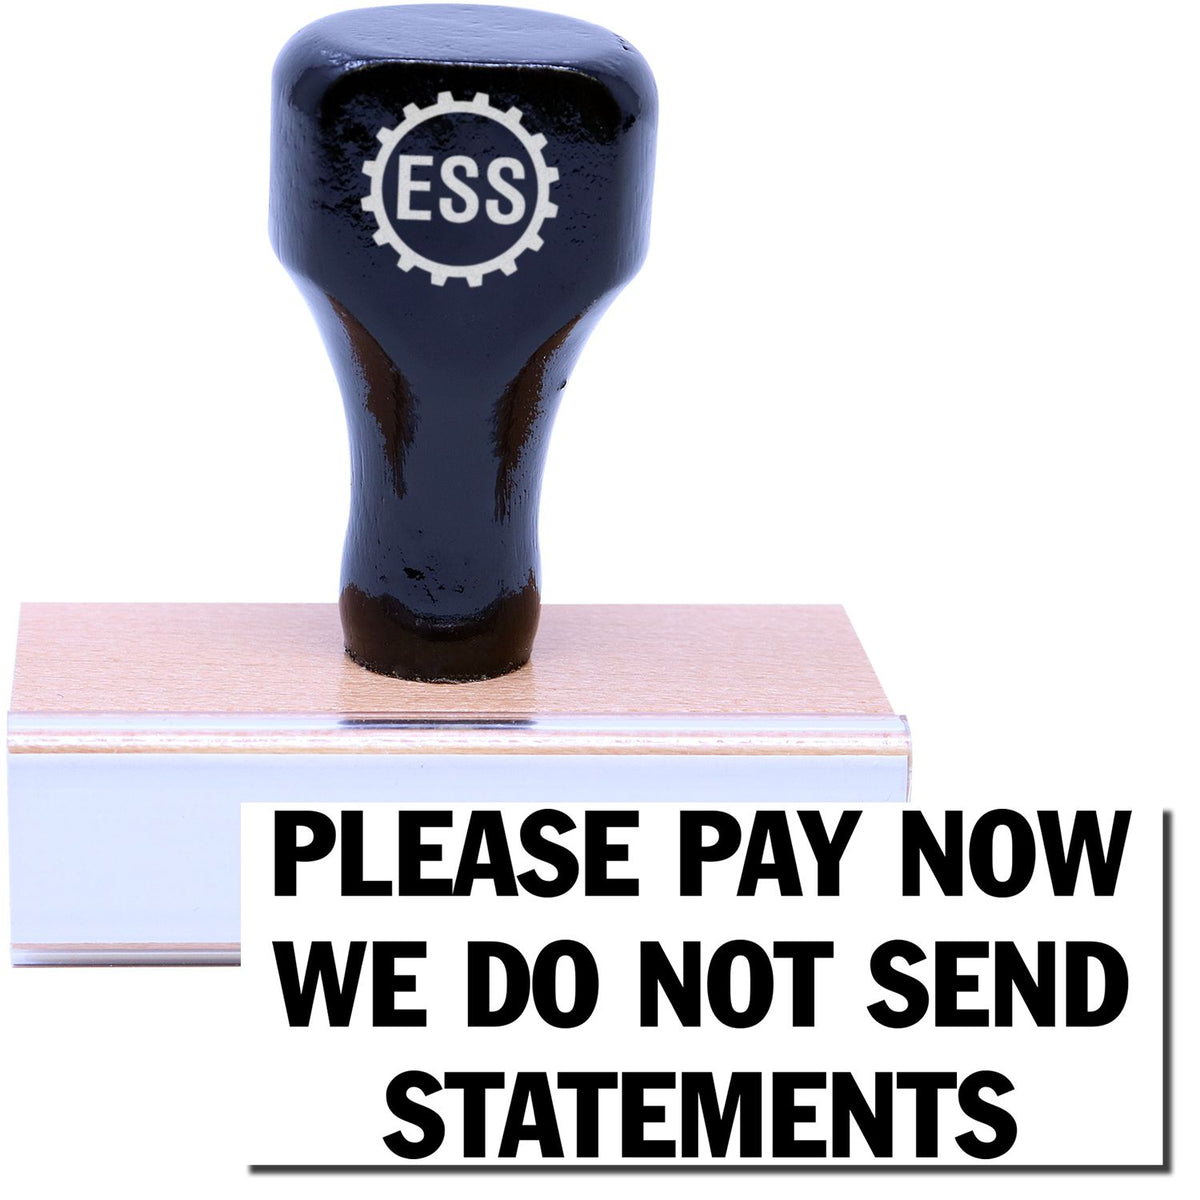 A stock office rubber stamp with a stamped image showing how the text &quot;PLEASE PAY NOW WE DO NOT SEND STATEMENTS&quot; in a large font is displayed after stamping.